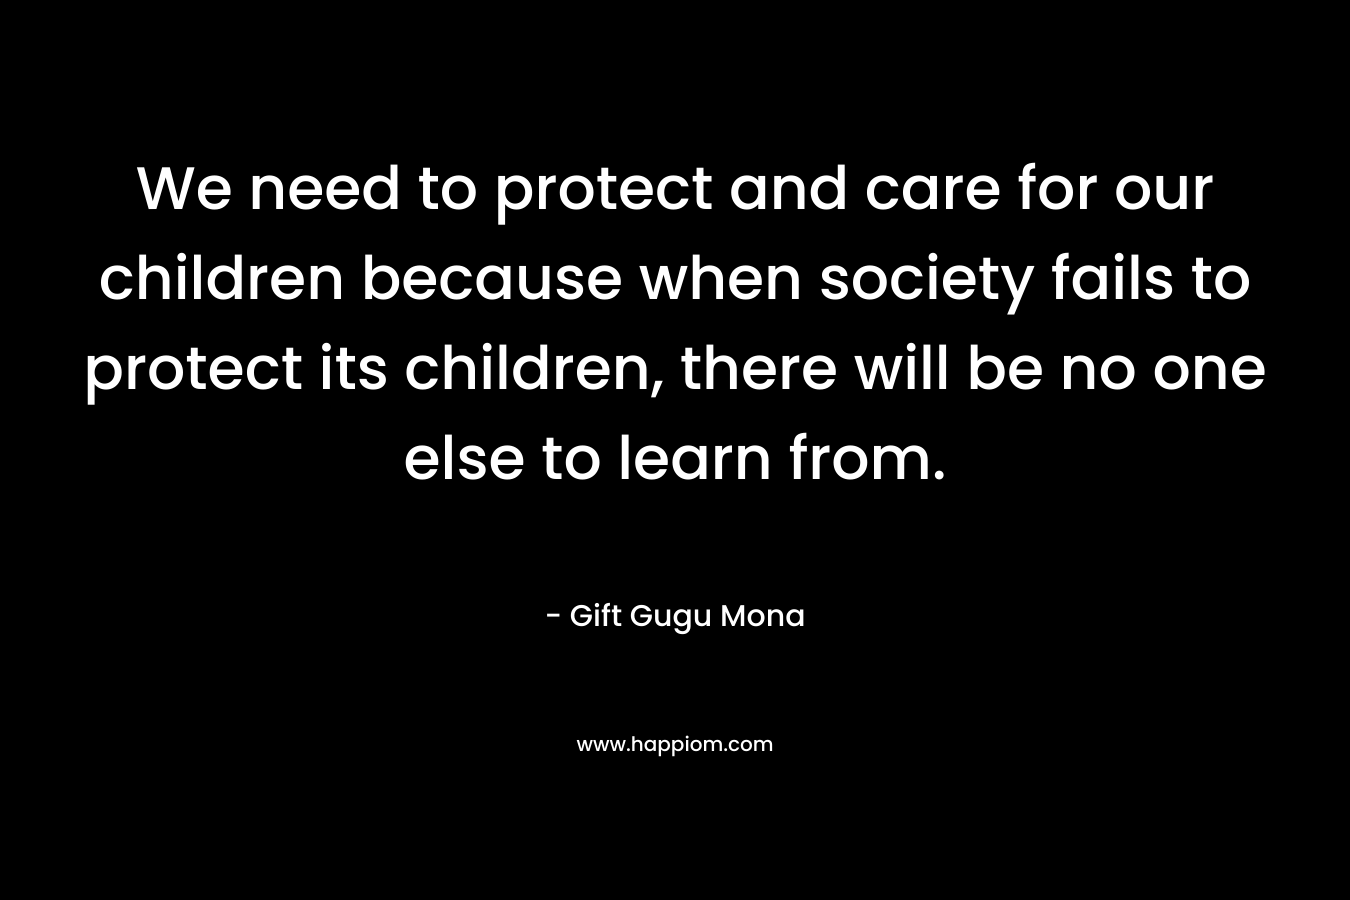 We need to protect and care for our children because when society fails to protect its children, there will be no one else to learn from.